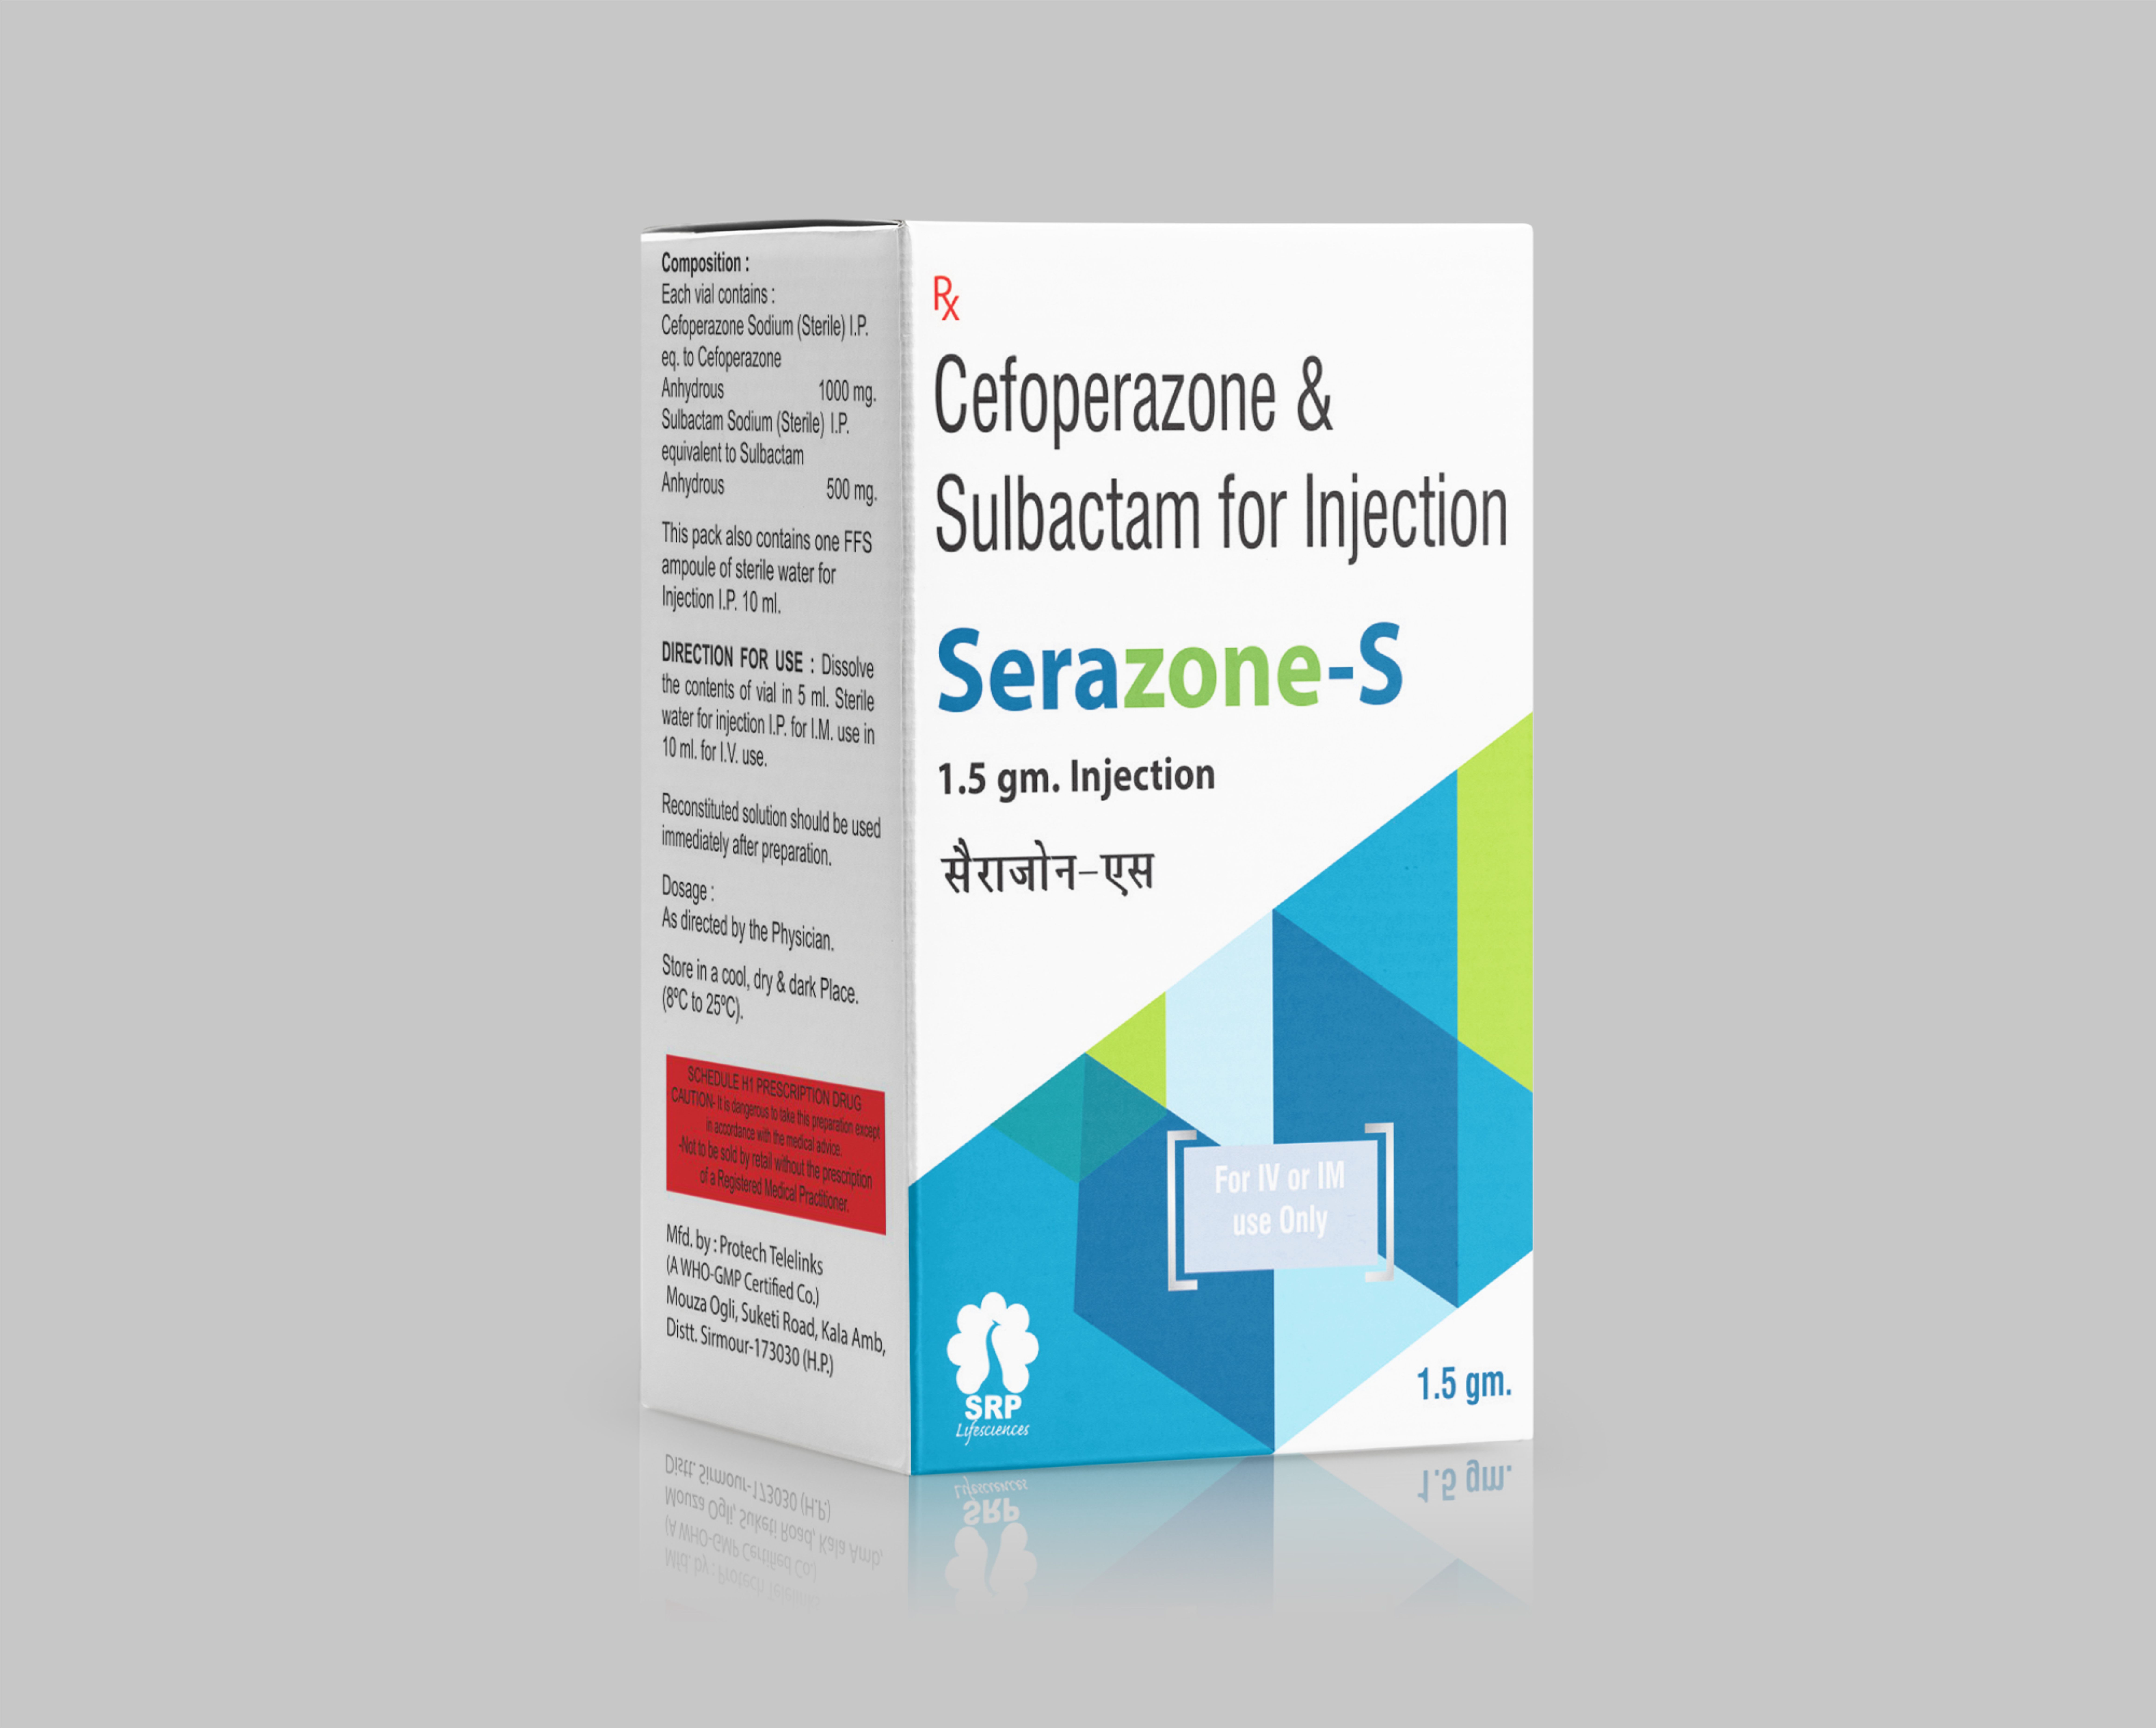 Product Name: CERAZONE S 1.5  injection, Compositions of CERAZONE S 1.5  injection are Cefoperazone & Sulbactam for injection - Cynak Healthcare